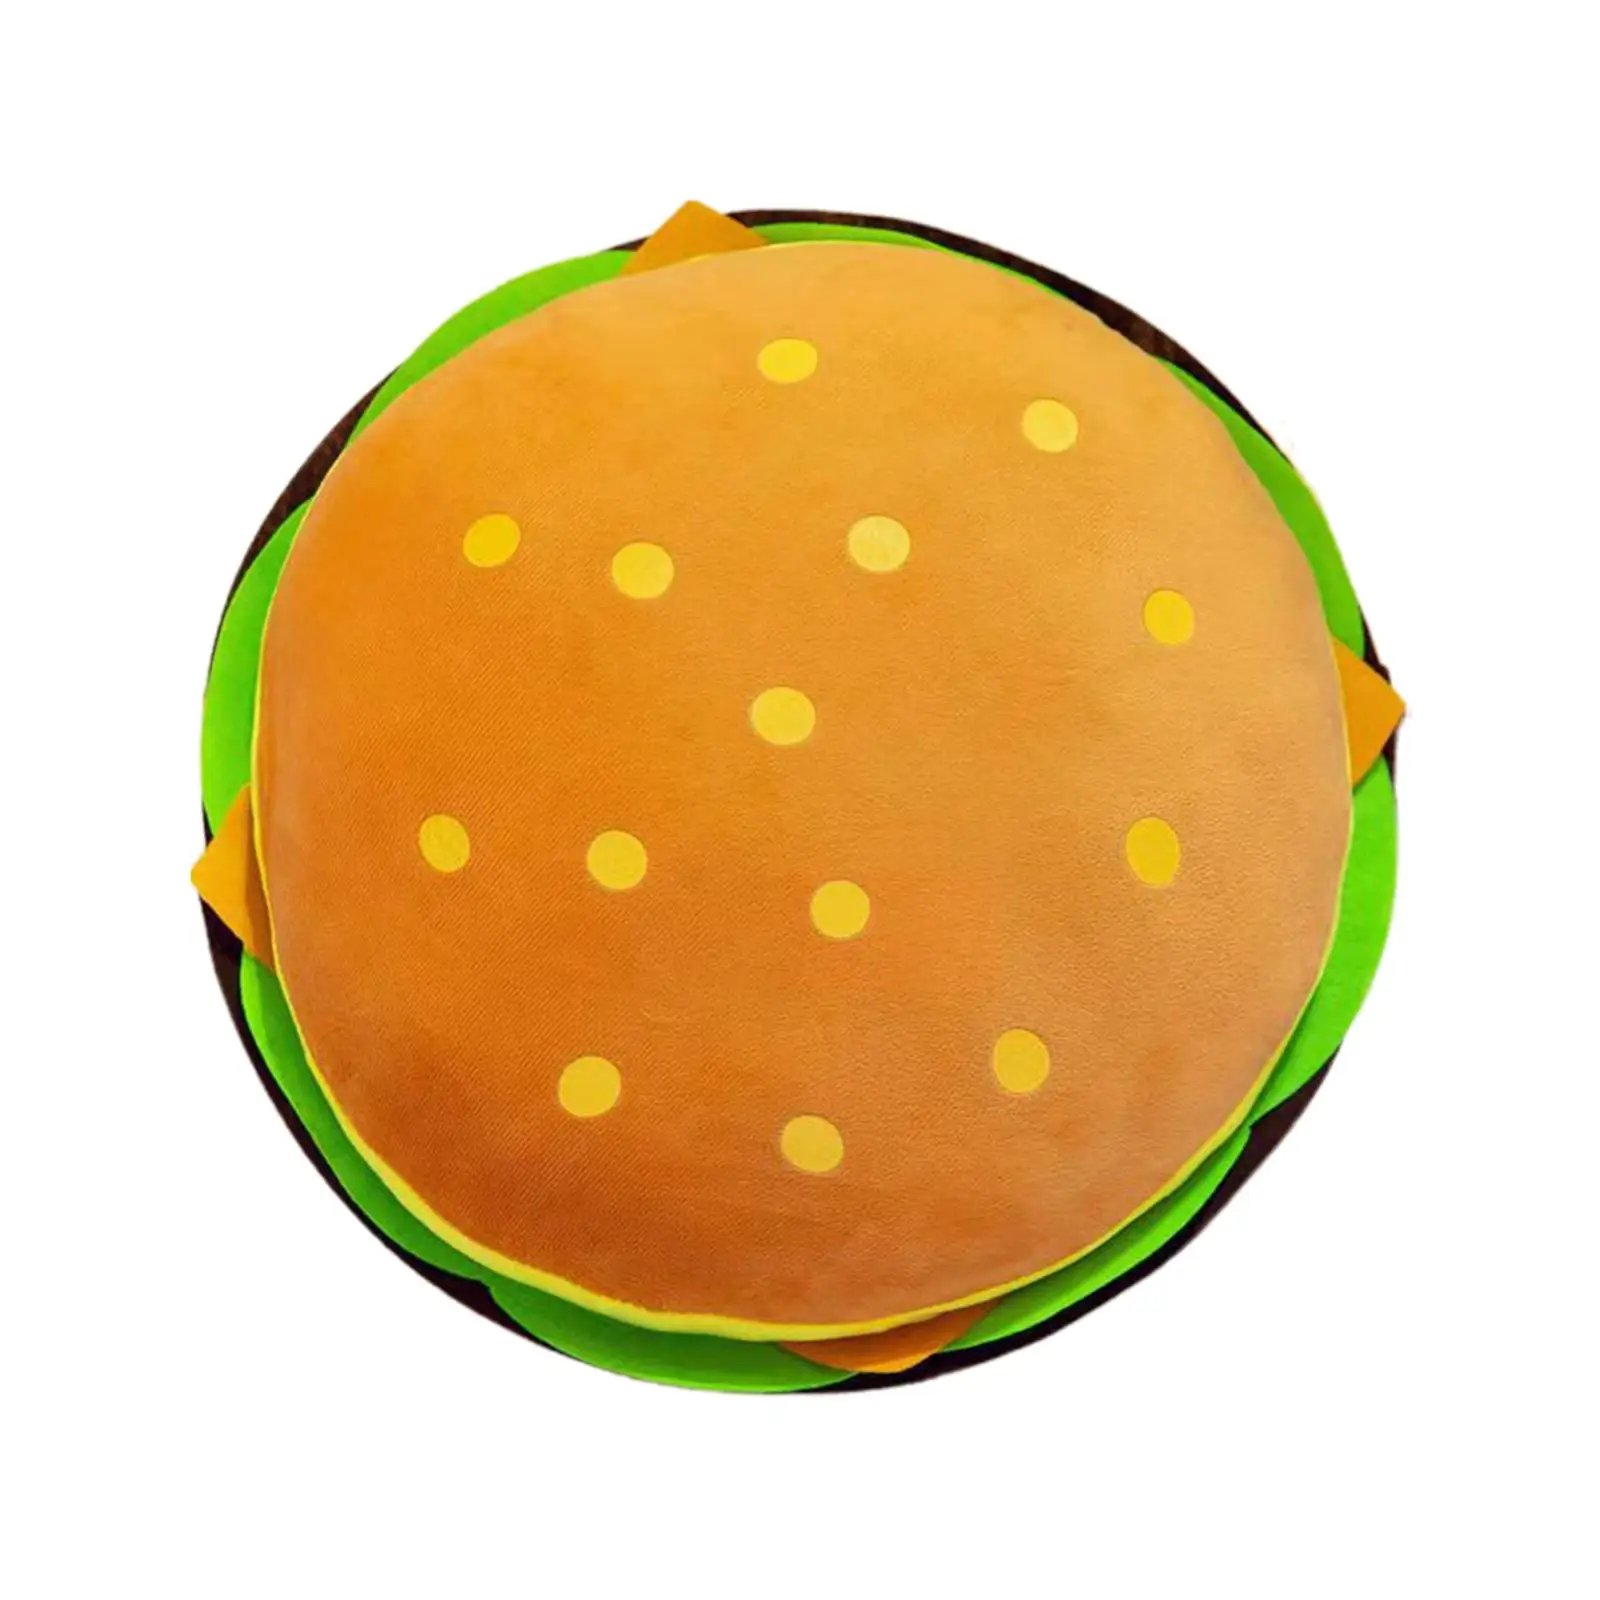 Cheeseburger Plush Toy Cushion Hugging Toy Livingroom Home Soft Photo Prop Hamburger Stuffed Pillow for Working Bedding Child